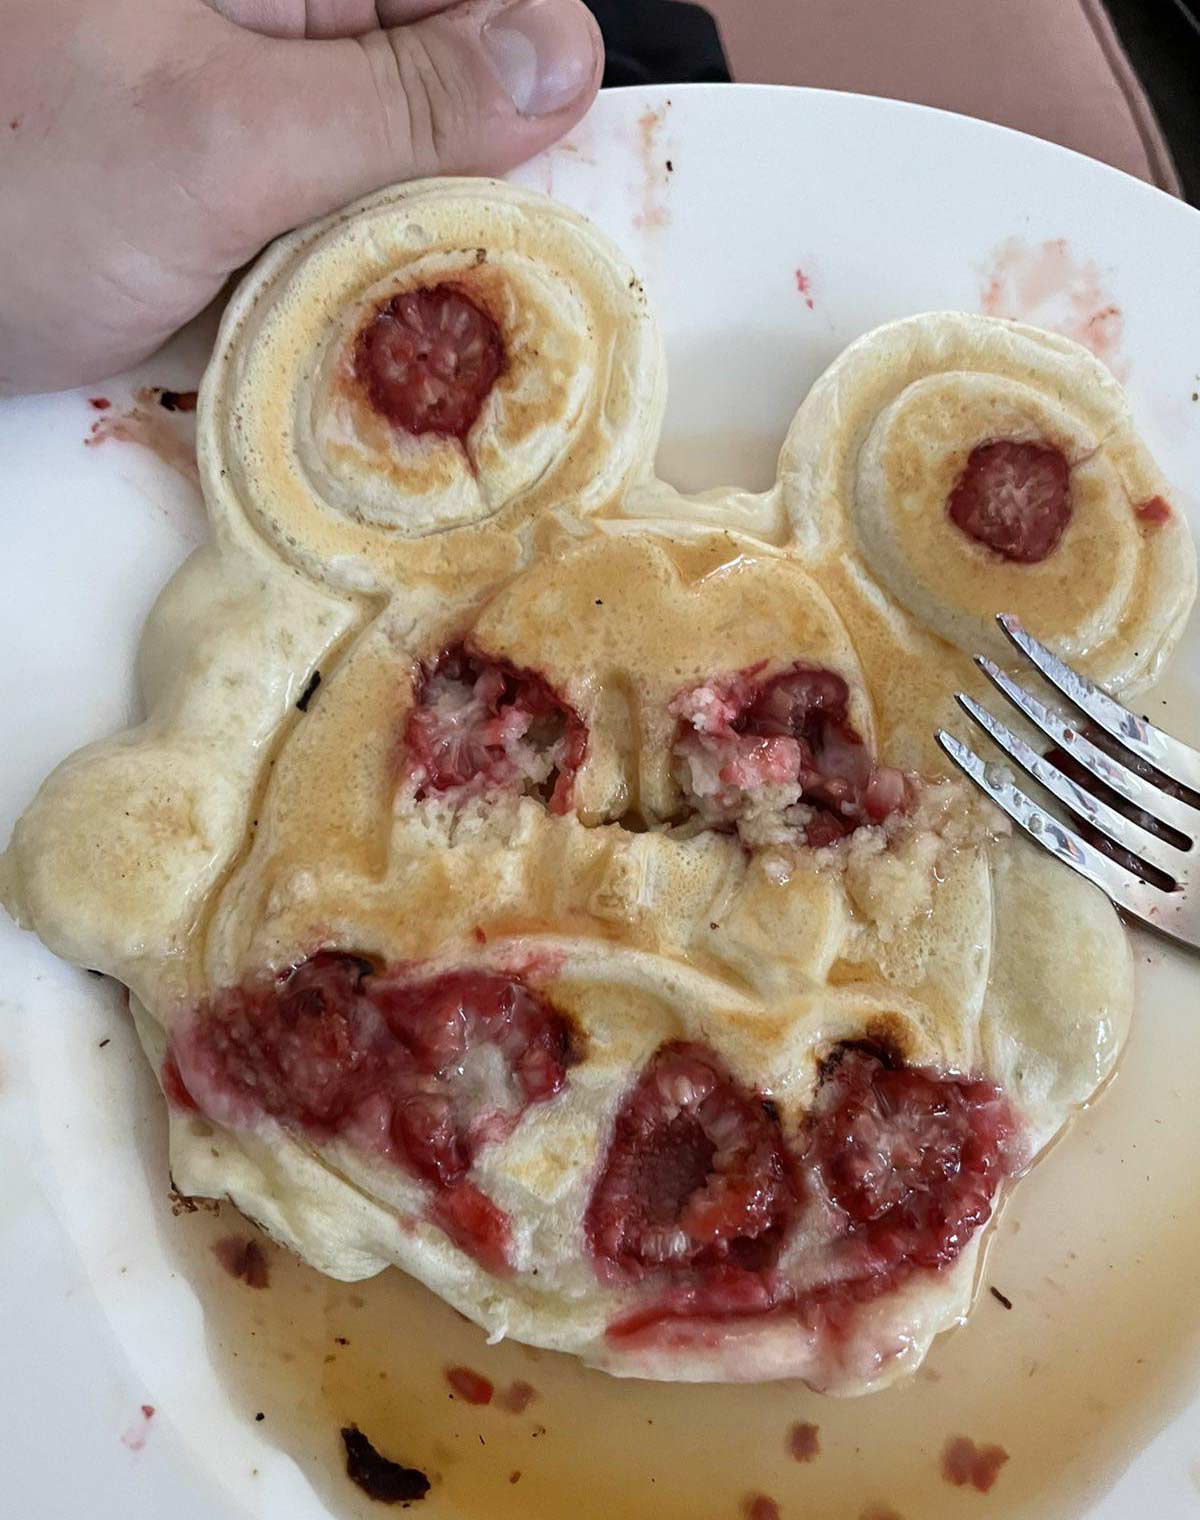 Tried to make a smiling Mickey Mouse waffle